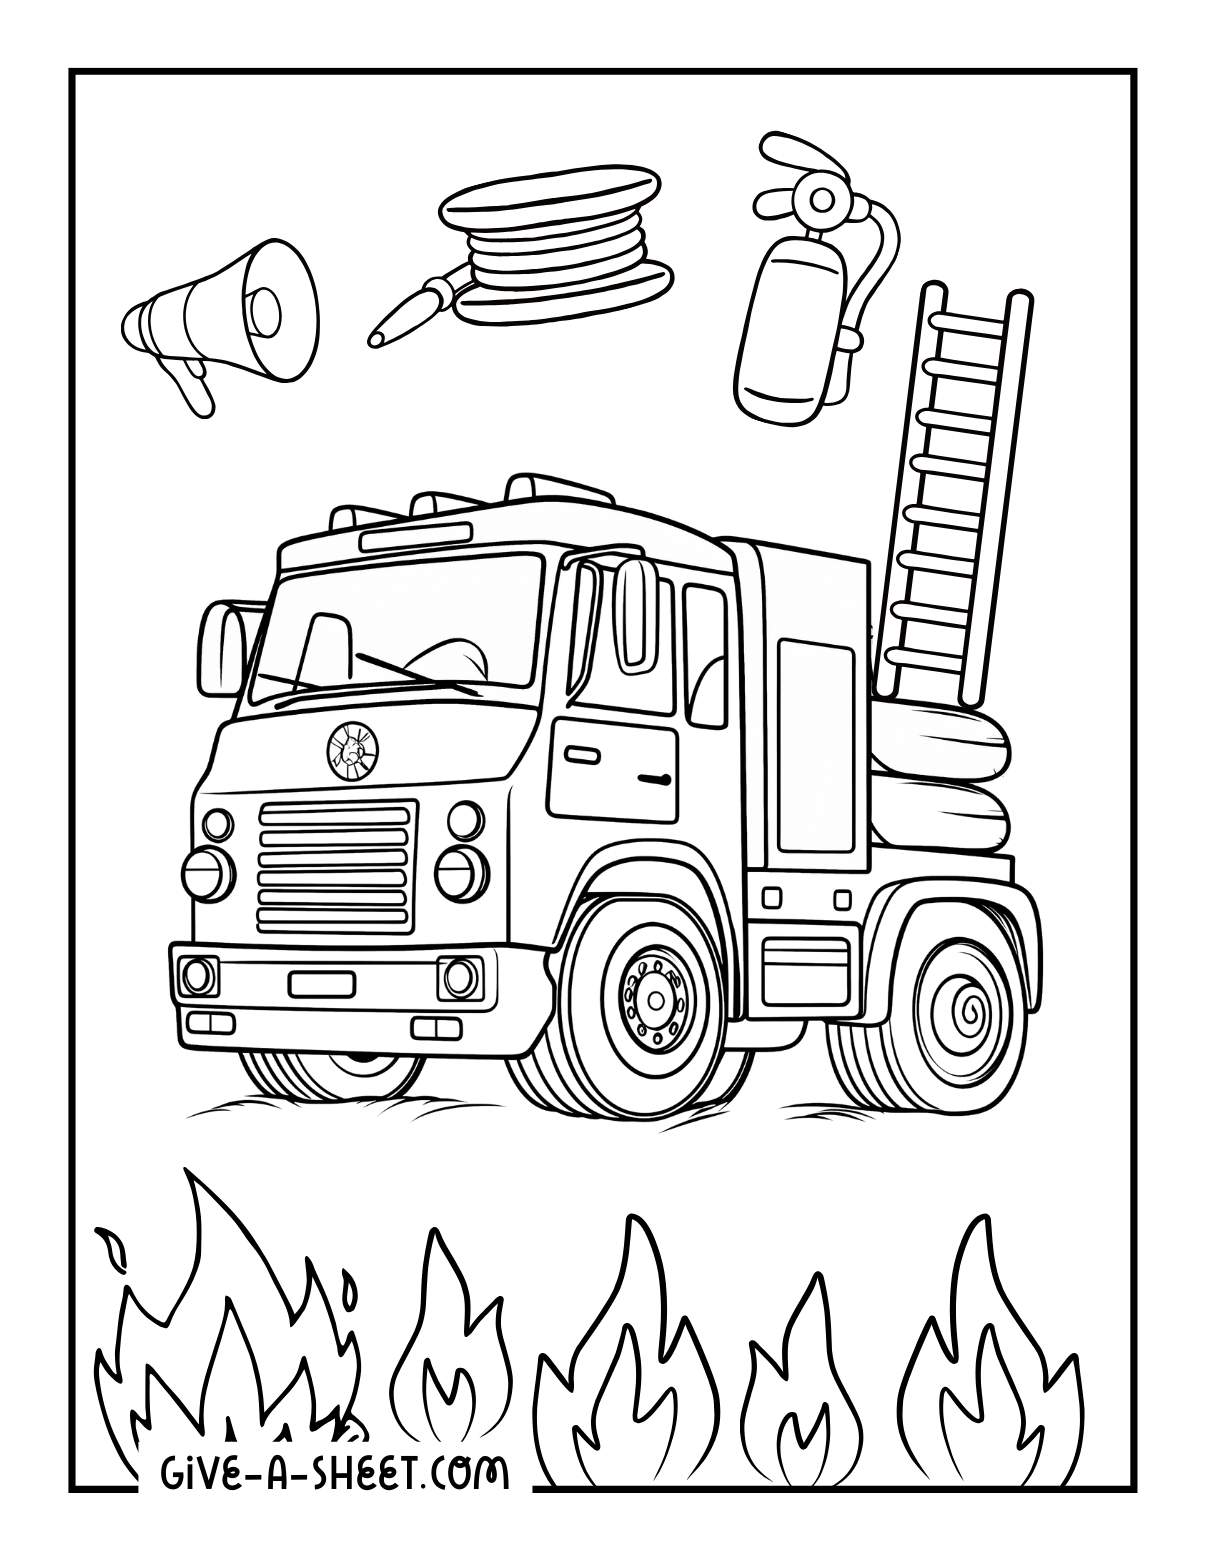 Fire truck coloring page for kids.